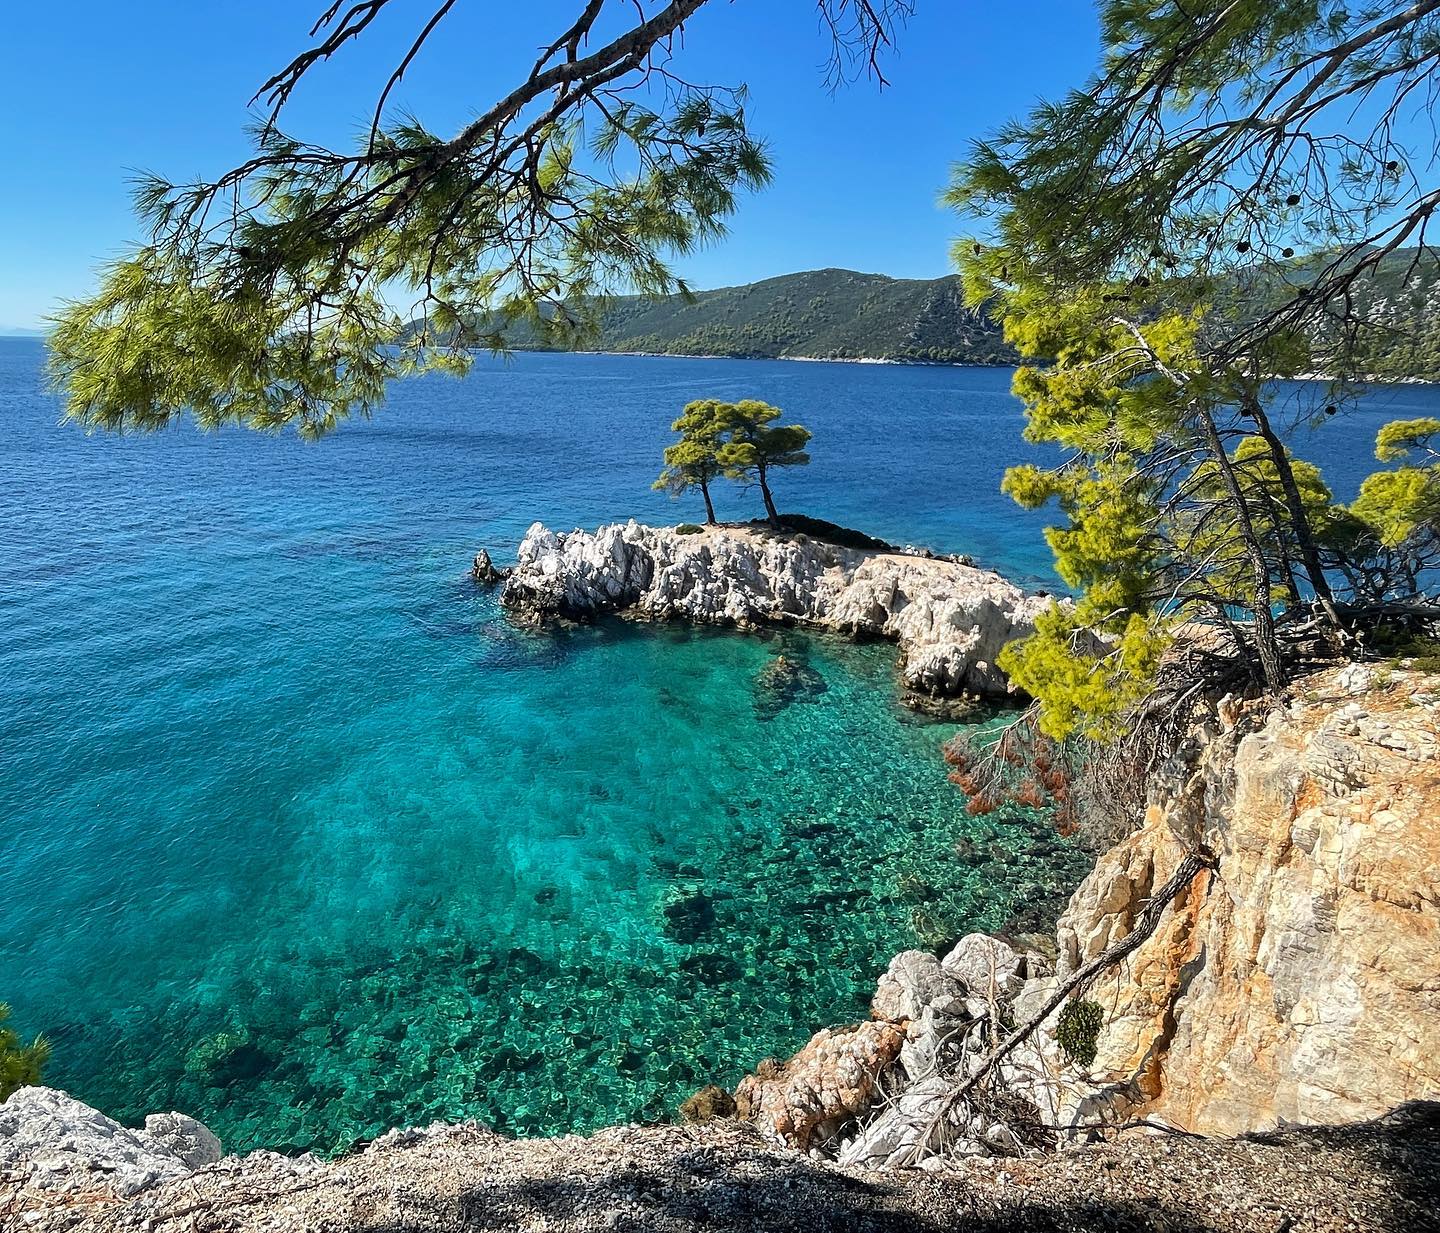 Are you a fan of the 2008 movie Mamma Mia? 🎶 

I recently traveled to Greece and visited the gorgeous island of Skopelos where they filmed most of the iconic musical! Thanks to @skopelos_excursions & @dolphinofskopelos, I enjoyed seeing the famous spots where all of my favorite scenes were filmed. Even if you haven’t seen the movie, Skopelos should be on your bucket list! It offers a tranquil atmosphere with very inviting clear waters and so much natural beauty every where you turn. @visitskopelosisland 🇫🇮💙
.
.
.
.
.
#greecetravel #greecelover #greecevacation #reasonstovisitgreece #islandsofgreece #travel_greece #visitgreece #discovergreece #beautifulgreece #islandlife #islandliving #mammamiafilm #mammamiagreece #mammamiafilmlocations #visitskopelosisland #skopelosgreece #skopelosexcursions #mammamiatour #beautifuldestinations #wonderful_places #prettylittletrips #pursuepretty #luxurytravel #luxurytraveler #wheretogonext #travelblogger #aroundtheworldpix #flashesofdelight #bucketlisttravel #passportready